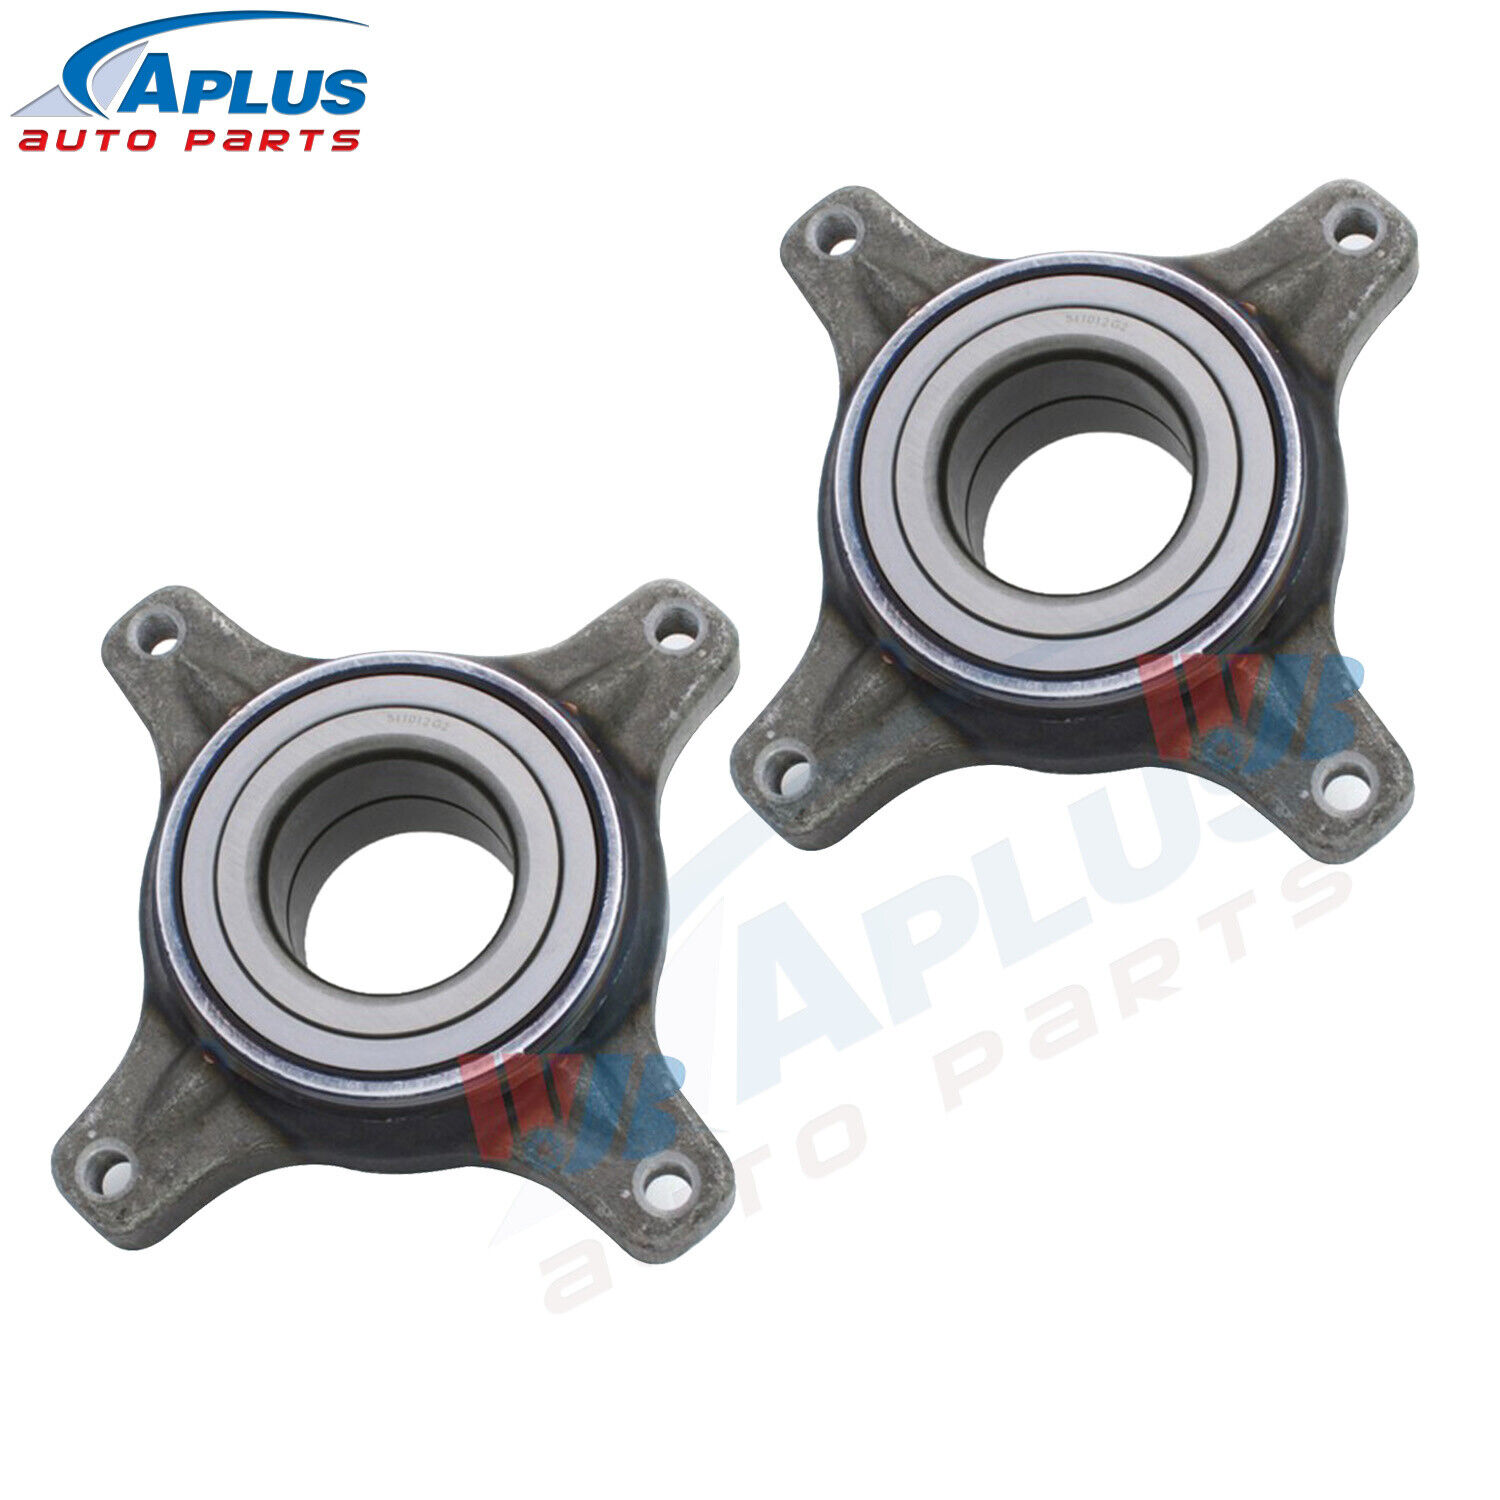 Pair Rear Wheel Hub Bearing Assembly for 91-05 Acura NSX Coupe 2-Door 3.0L 3.2L